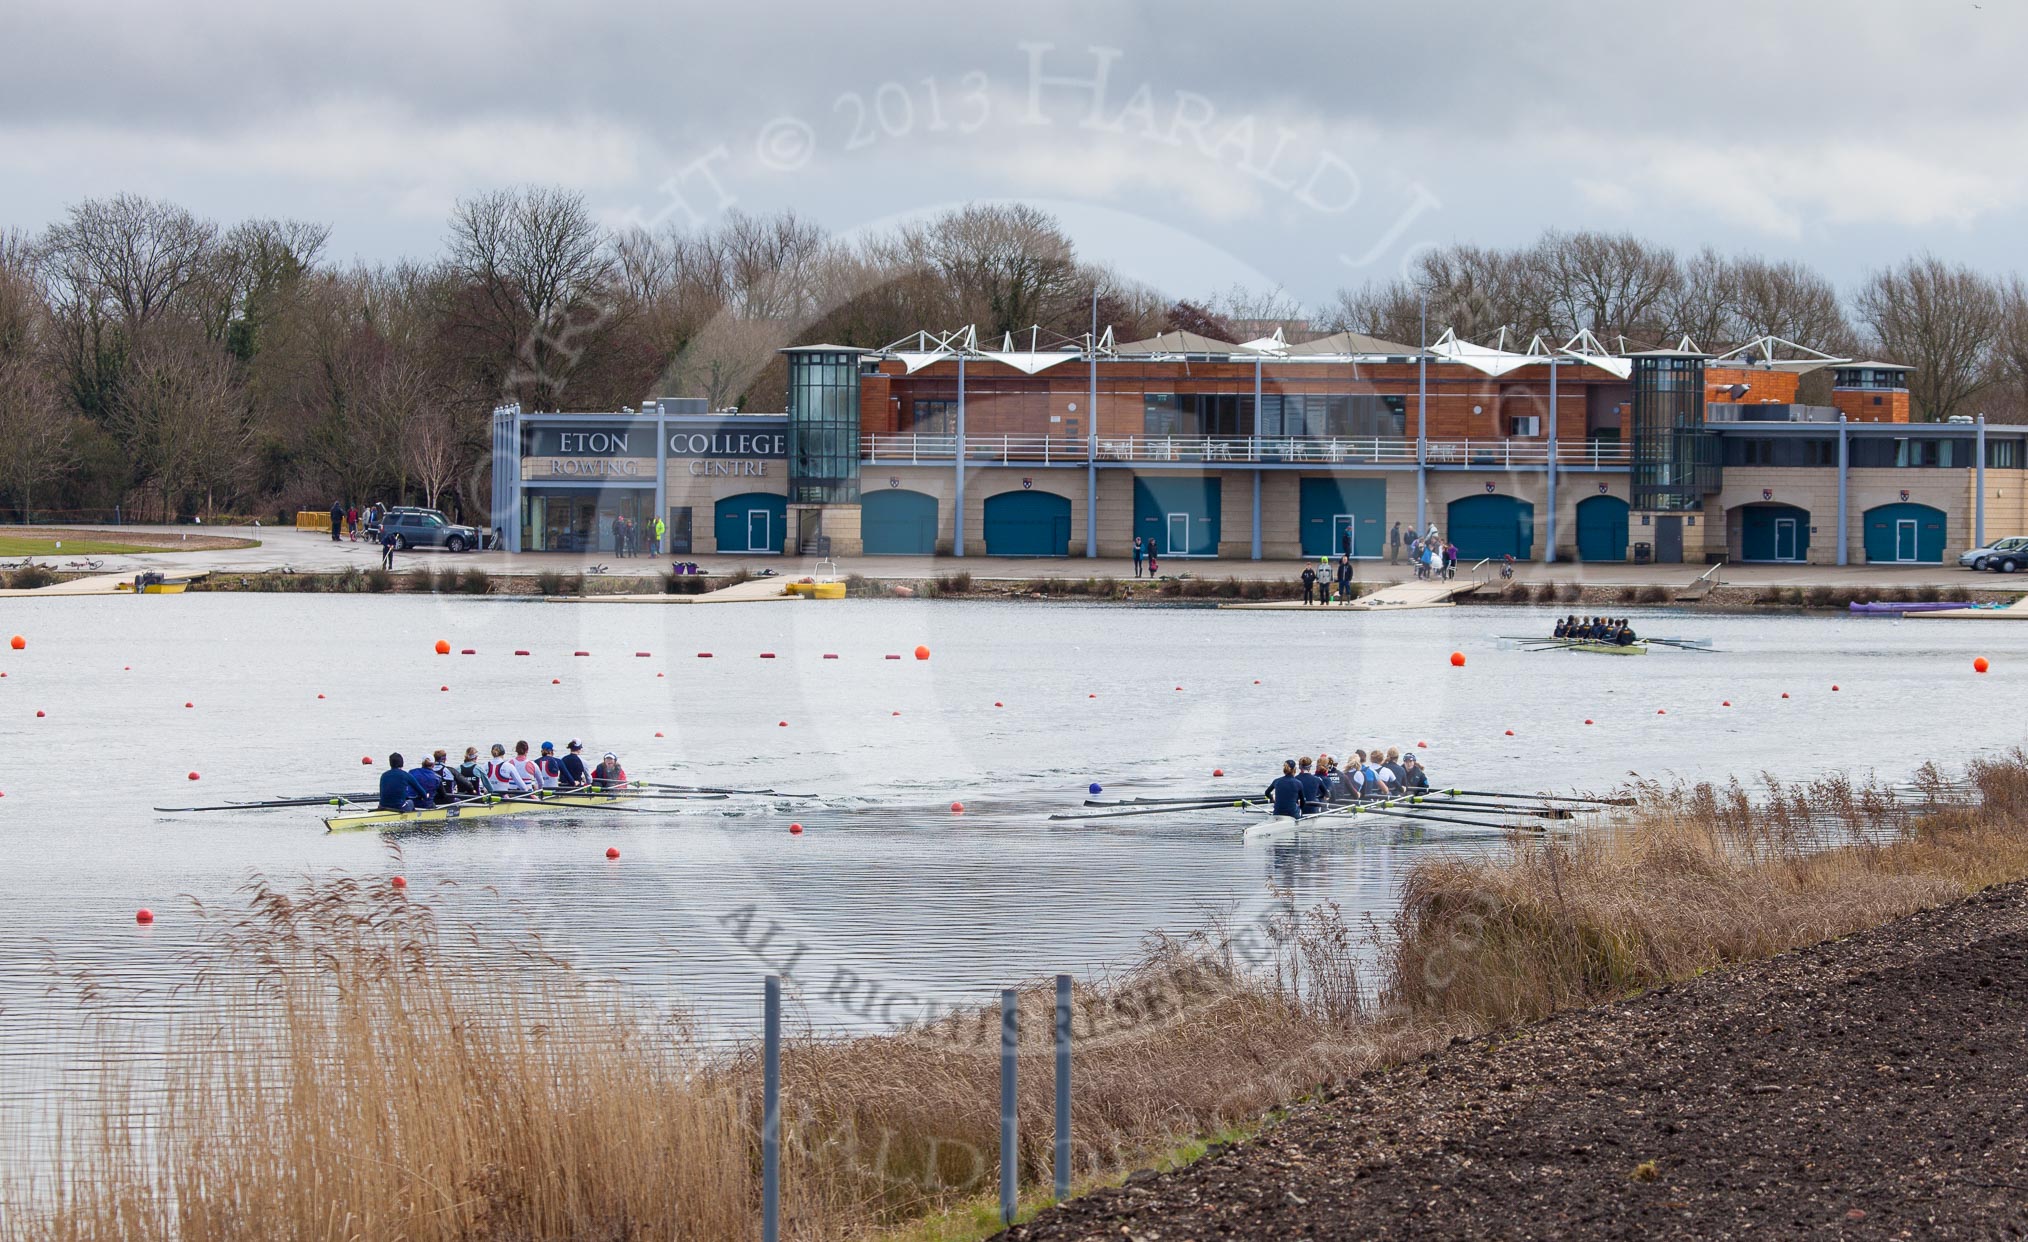 The Boat Race season 2013 - fixture OUWBC vs Olympians: Getting ready for a fixture at Dorney Lake, in front of the boathouse: On the left Olympians, on right the OUWBC Blue Boat..
Dorney Lake,
Dorney, Windsor,
Buckinghamshire,
United Kingdom,
on 16 March 2013 at 11:55, image #127